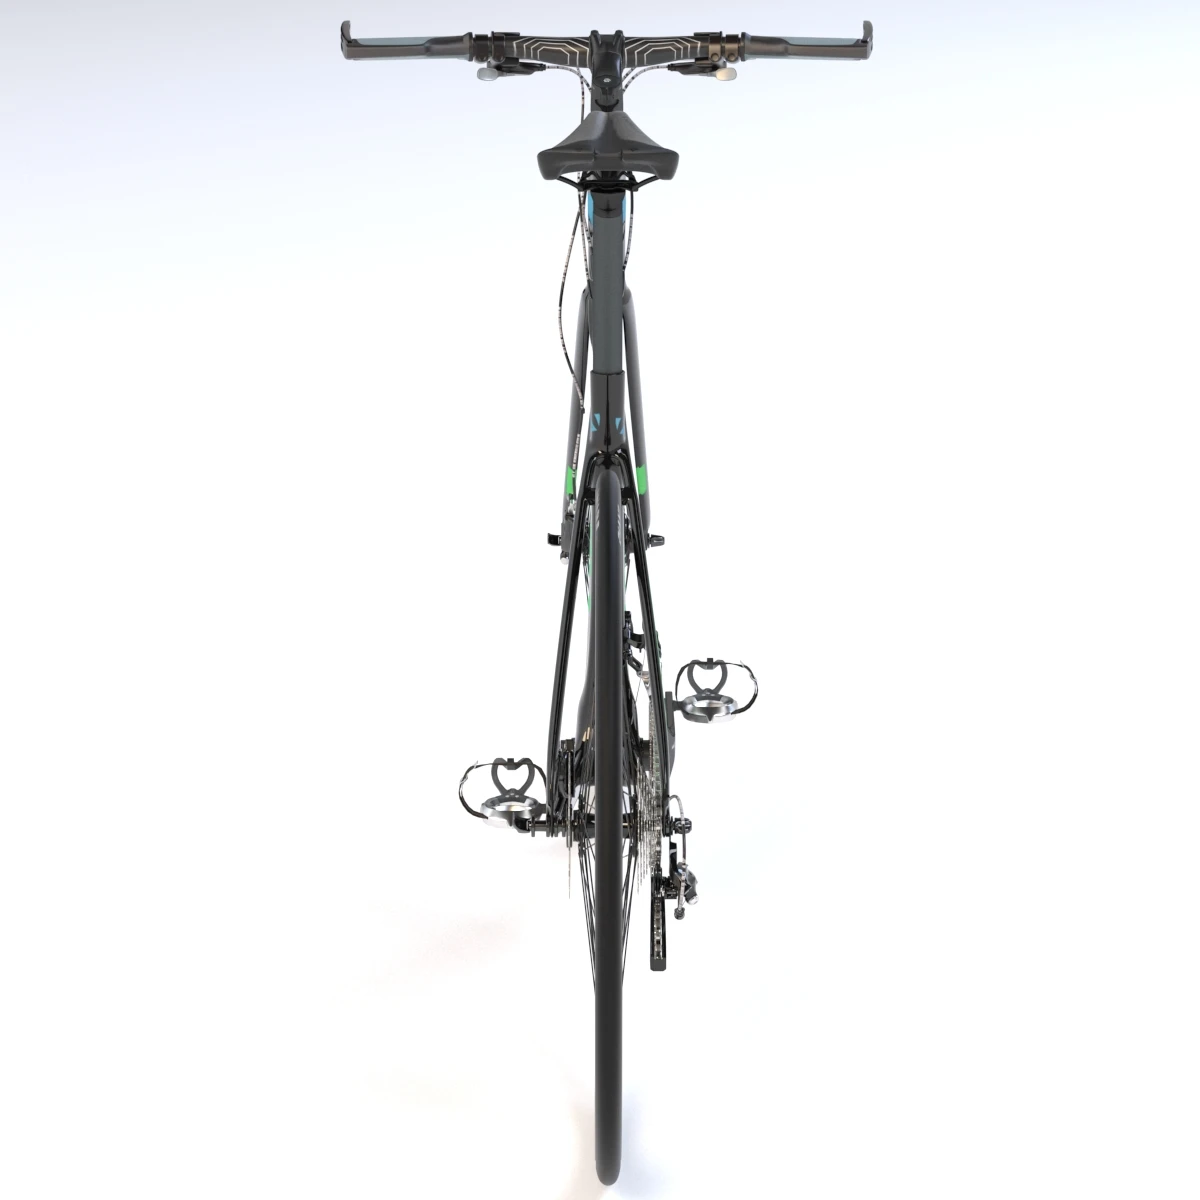 Giant Fastroad Cm1 Black Bicycle 3D Model_04